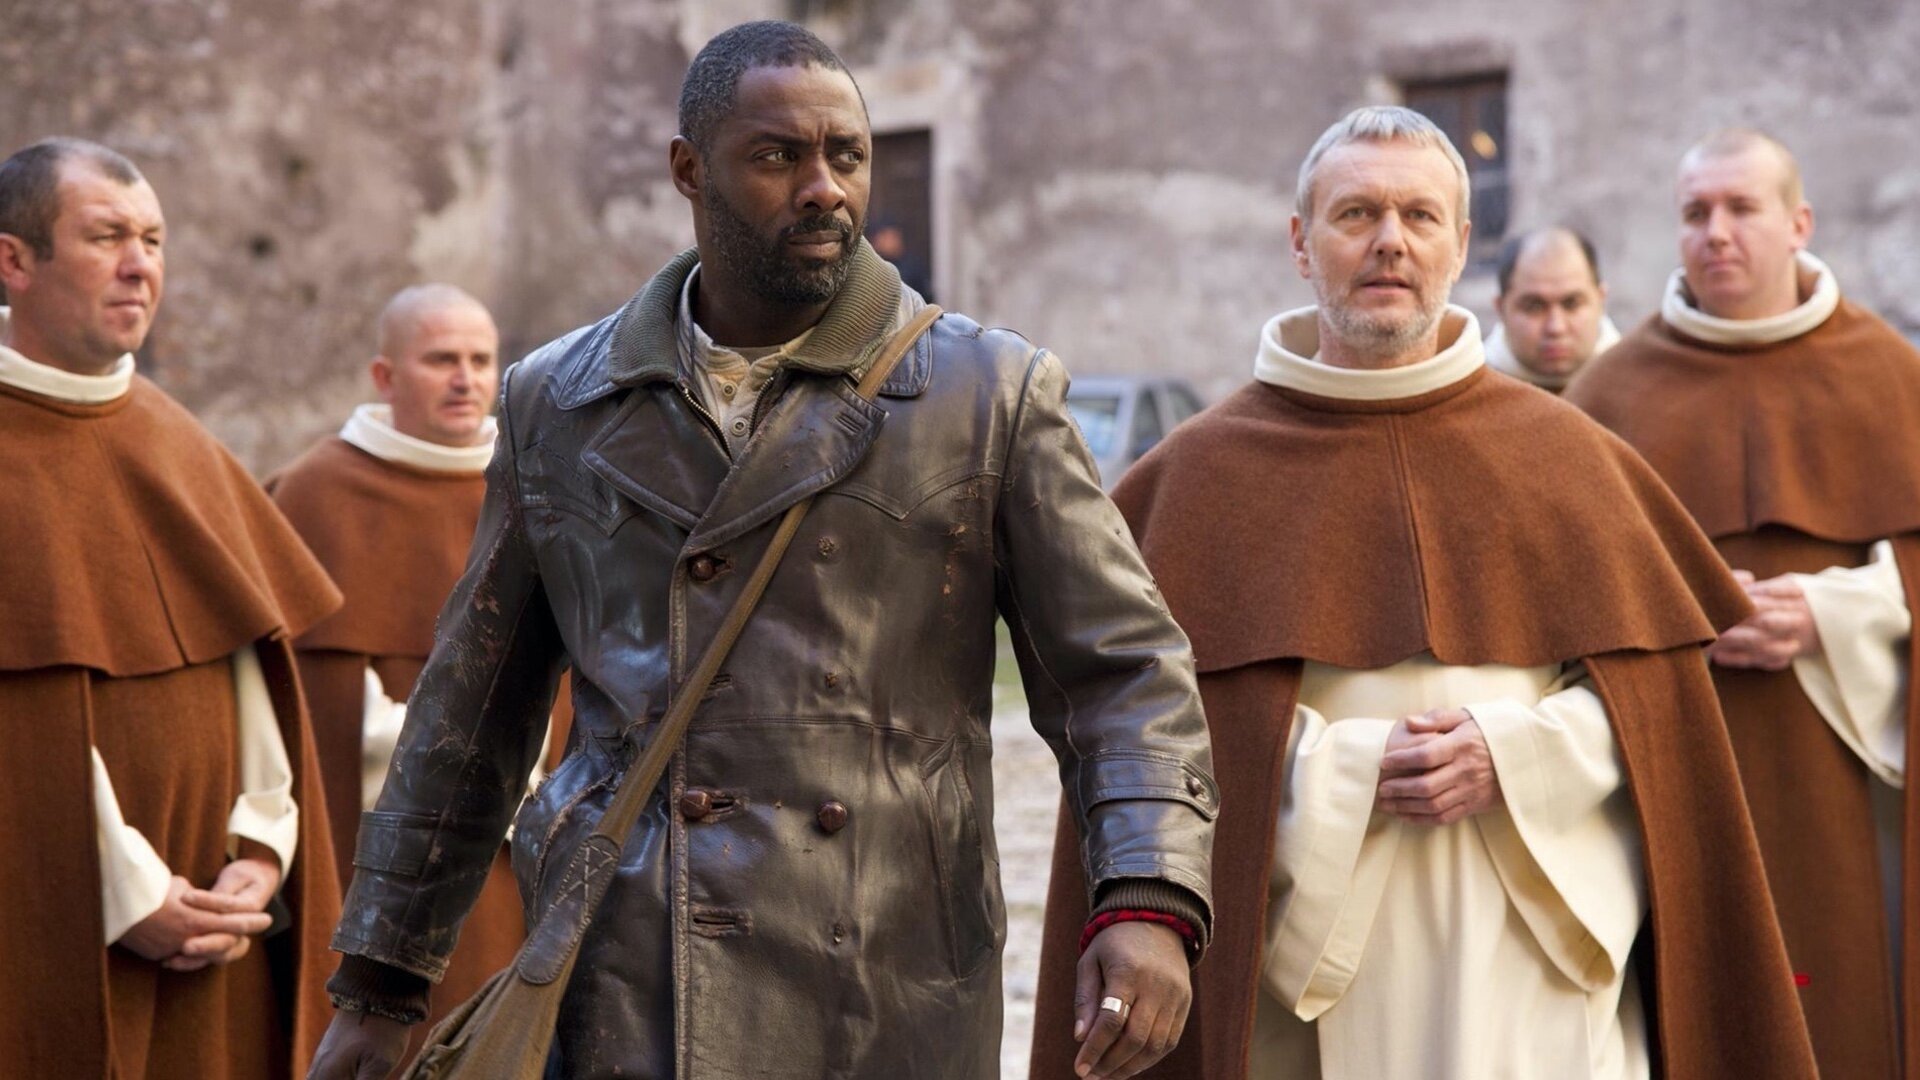 Teaser Trailer For 'Three Thousand Years Of Longing' Movie Starring Idris Elba